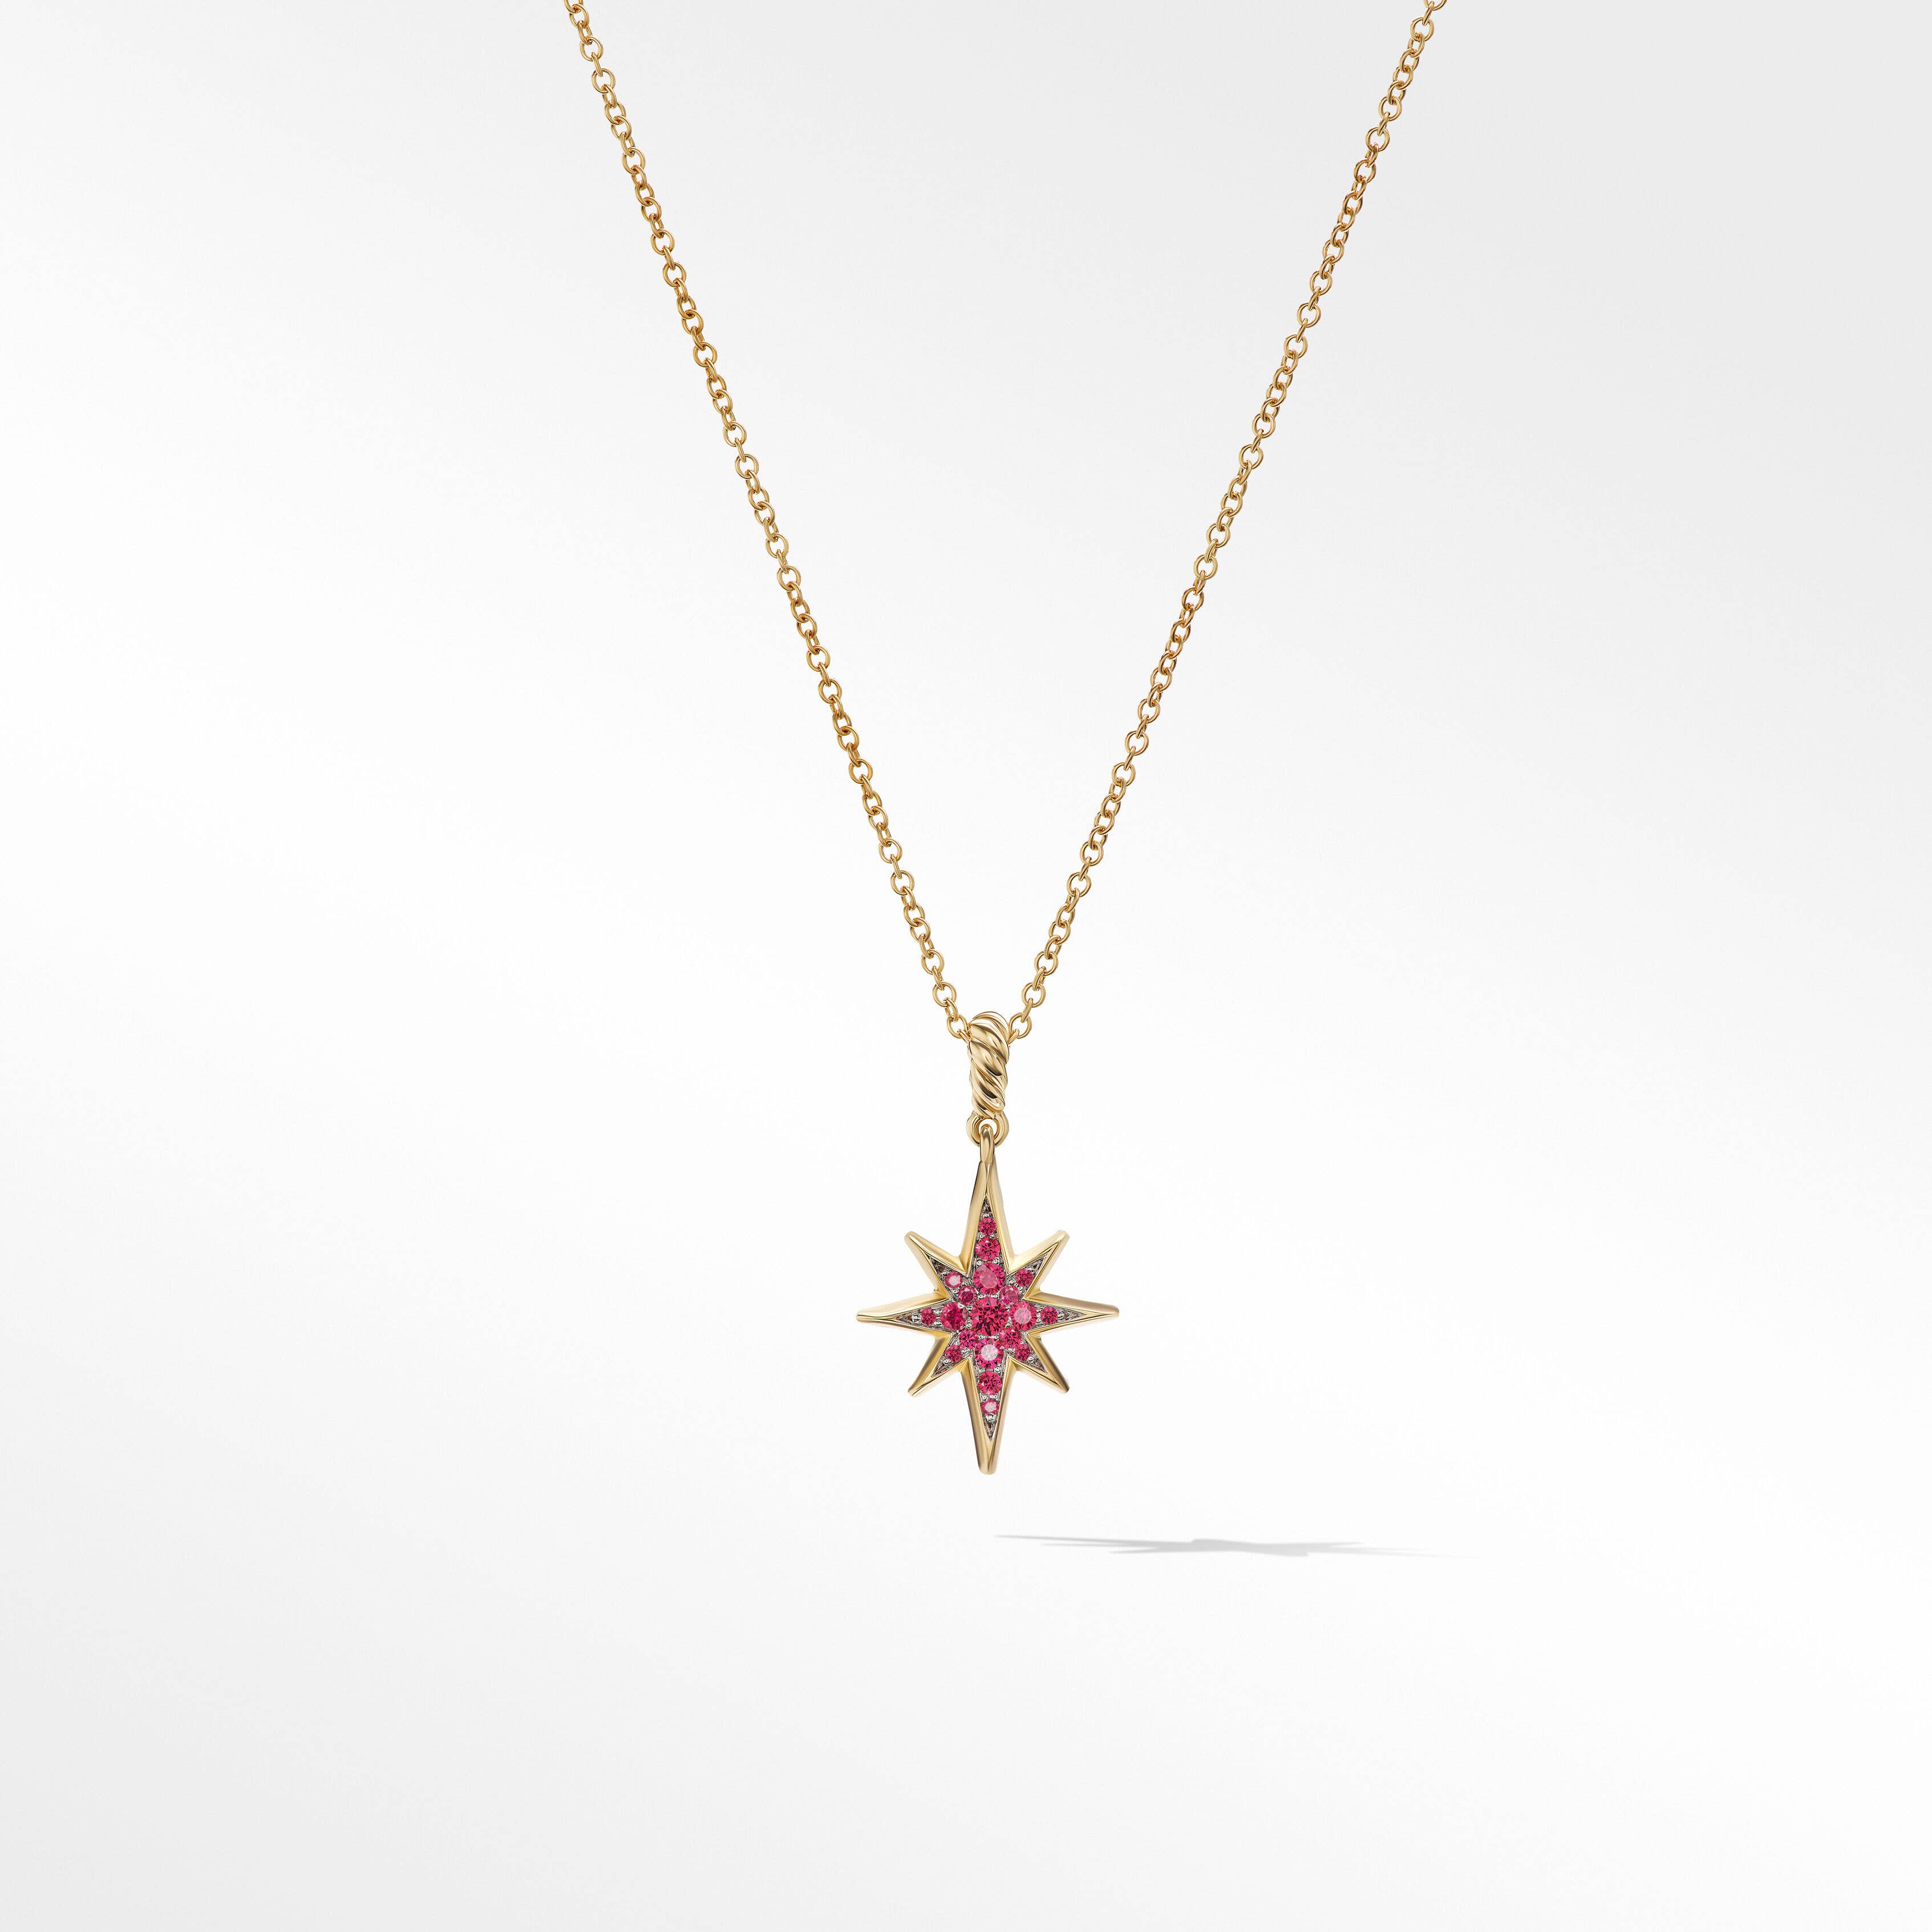 Cable Collectibles® North Star Necklace in 18K Yellow Gold with Pavé Rubies